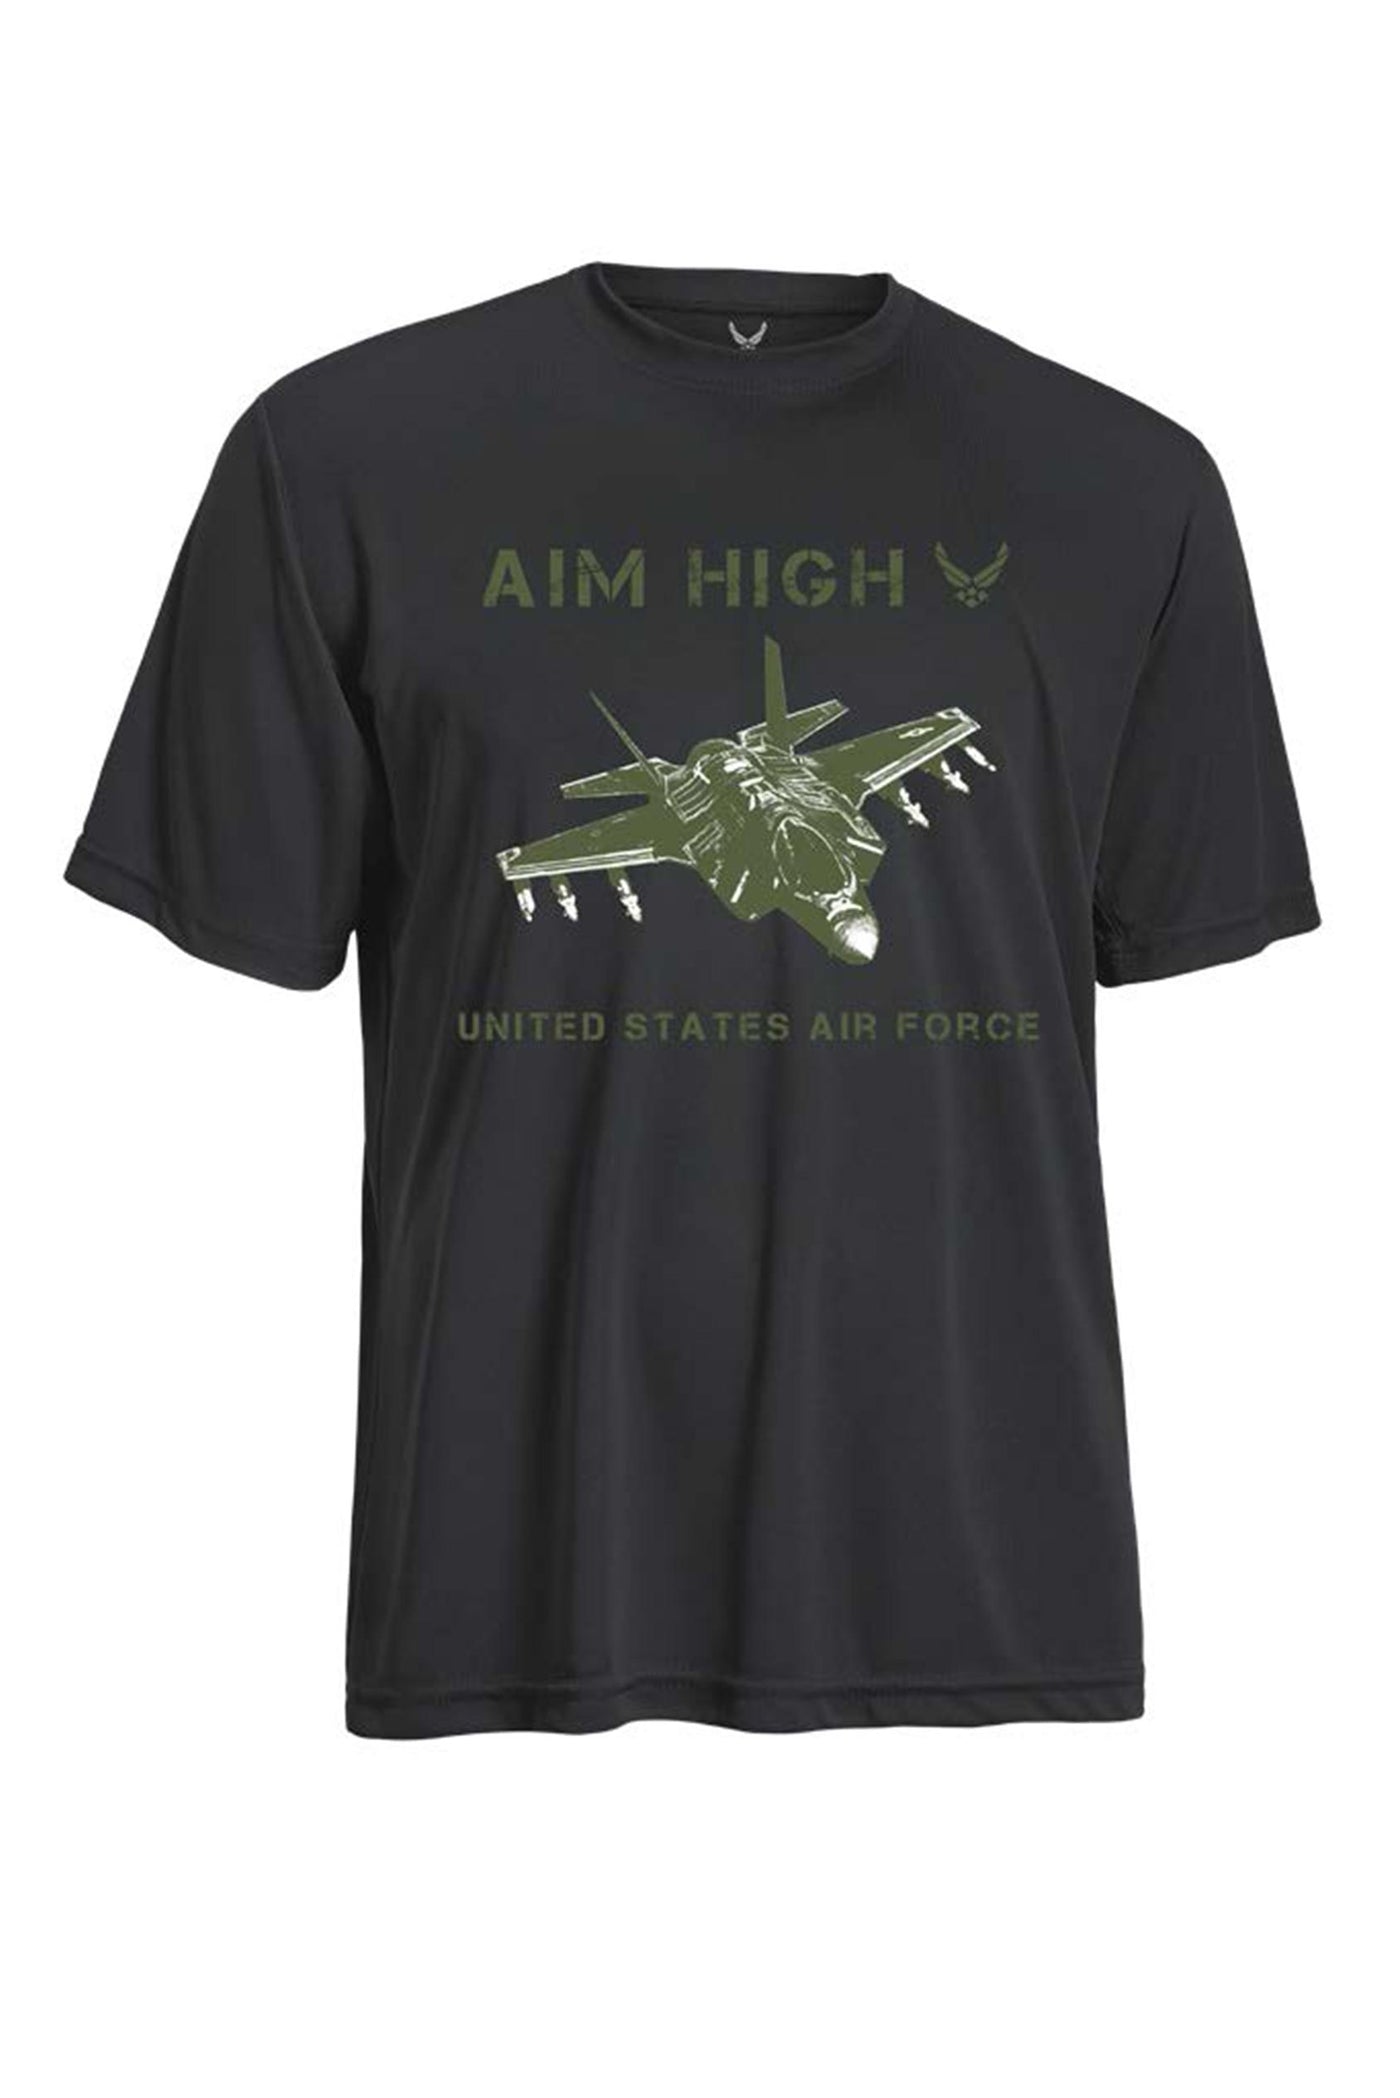 Expert Apparel Made in USA Men's Aim High Air Force Jet Graphic Tee Performance Workout Black#color_black 